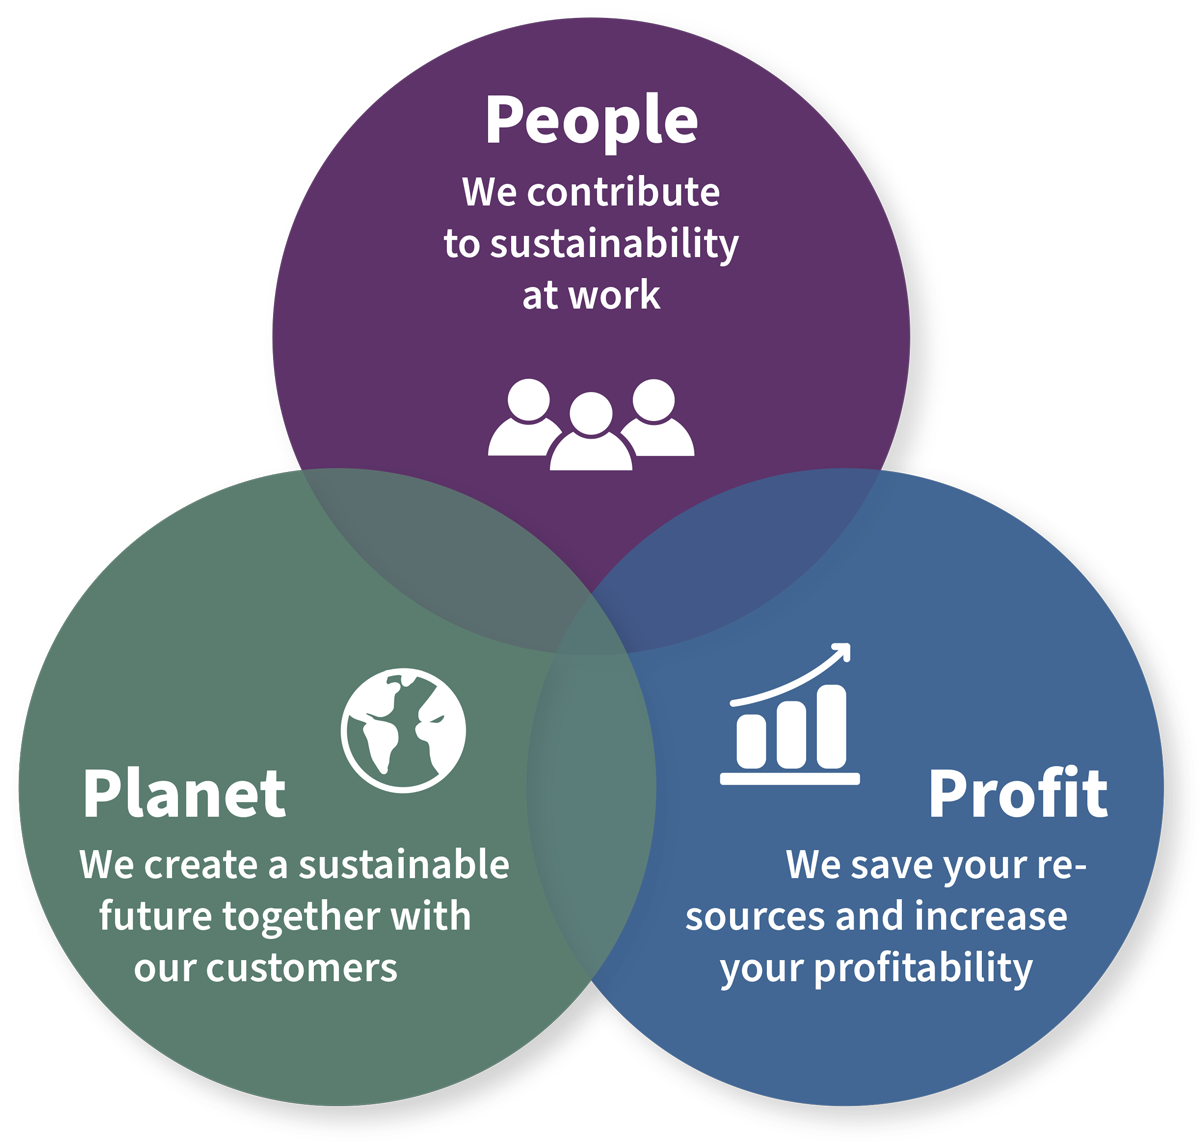 Sustainability of all parts